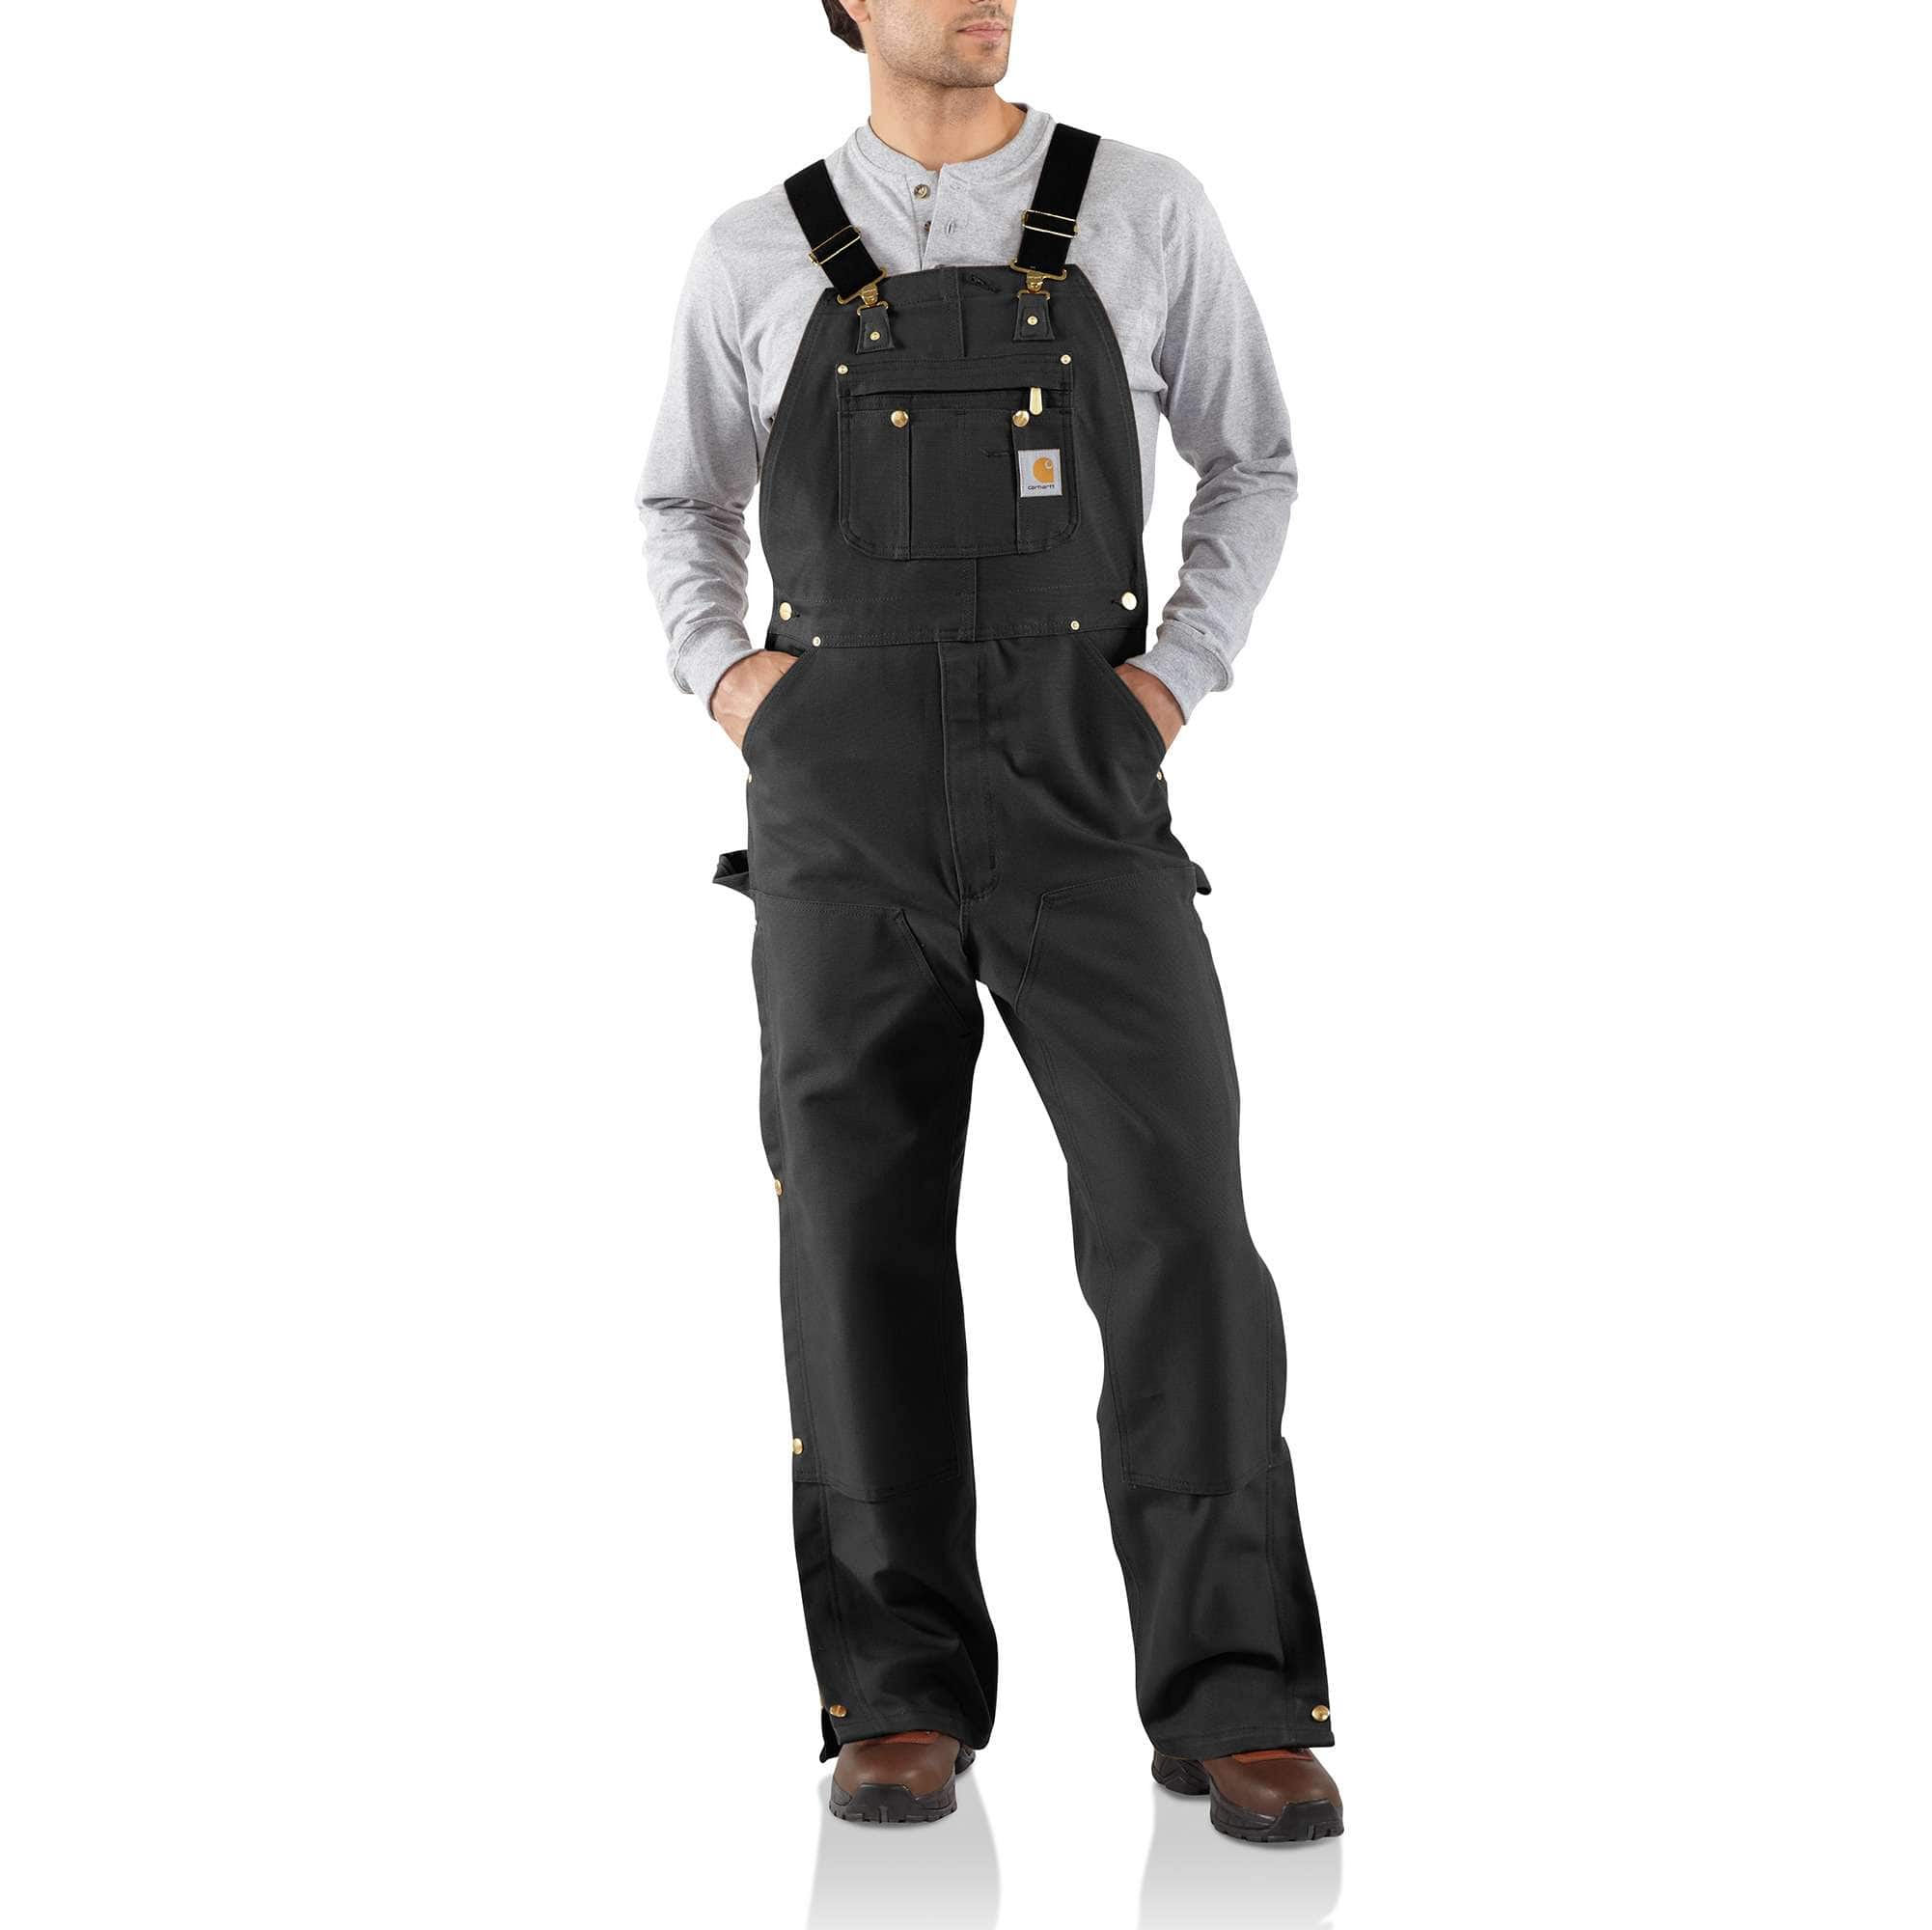 Loose Fit Firm Duck Bib Overall